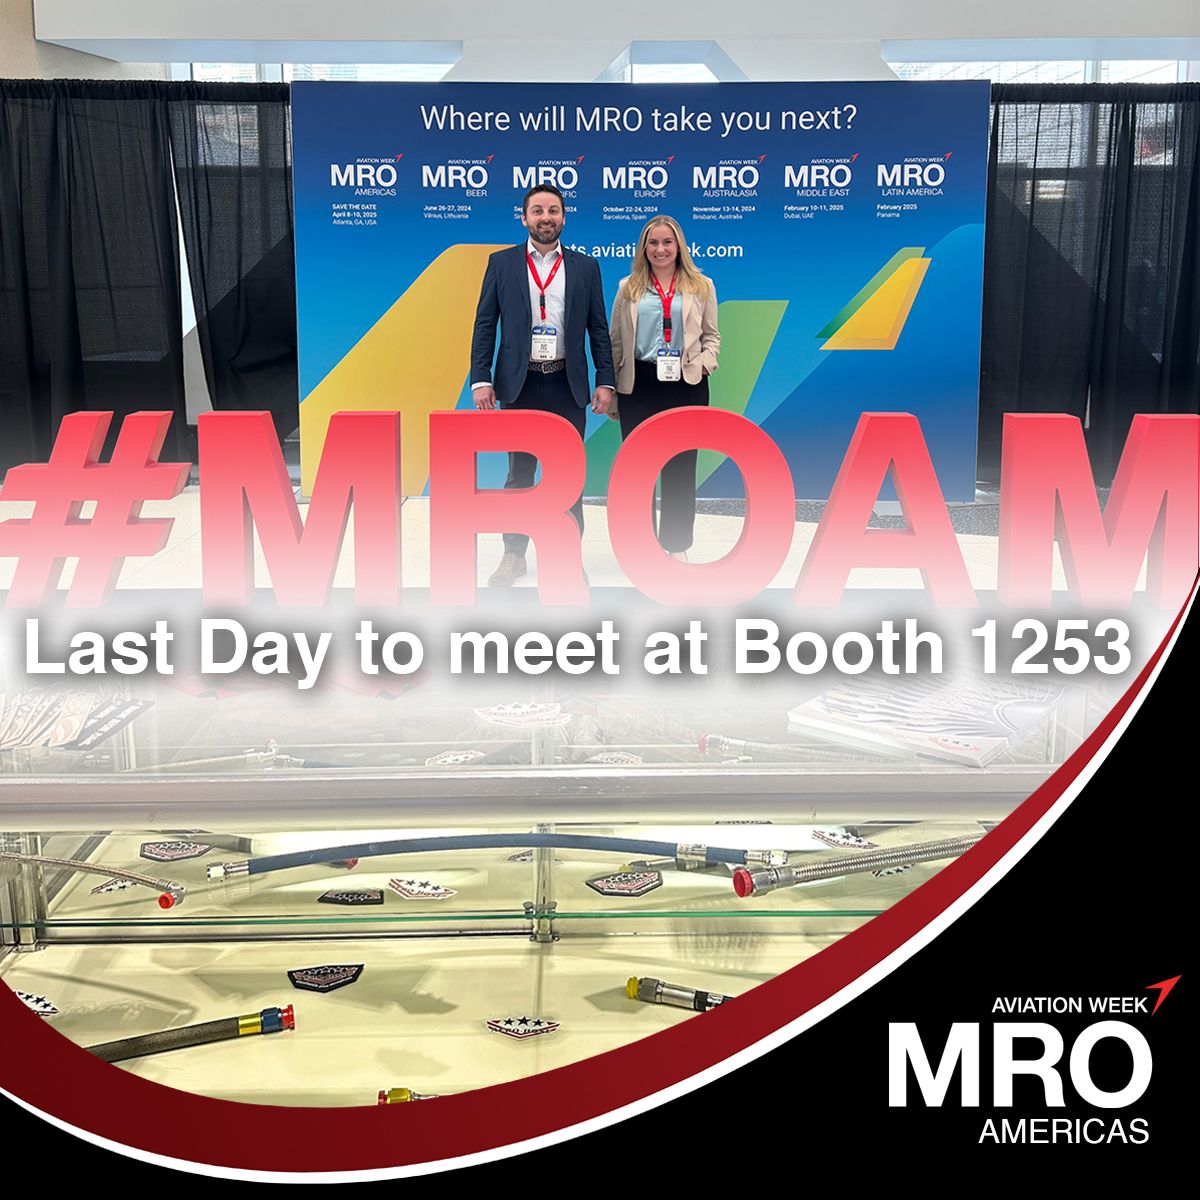 two individuals standing before a promotional banner at the mro americas event, with text "auto draft" and model airplanes displayed in the foreground.